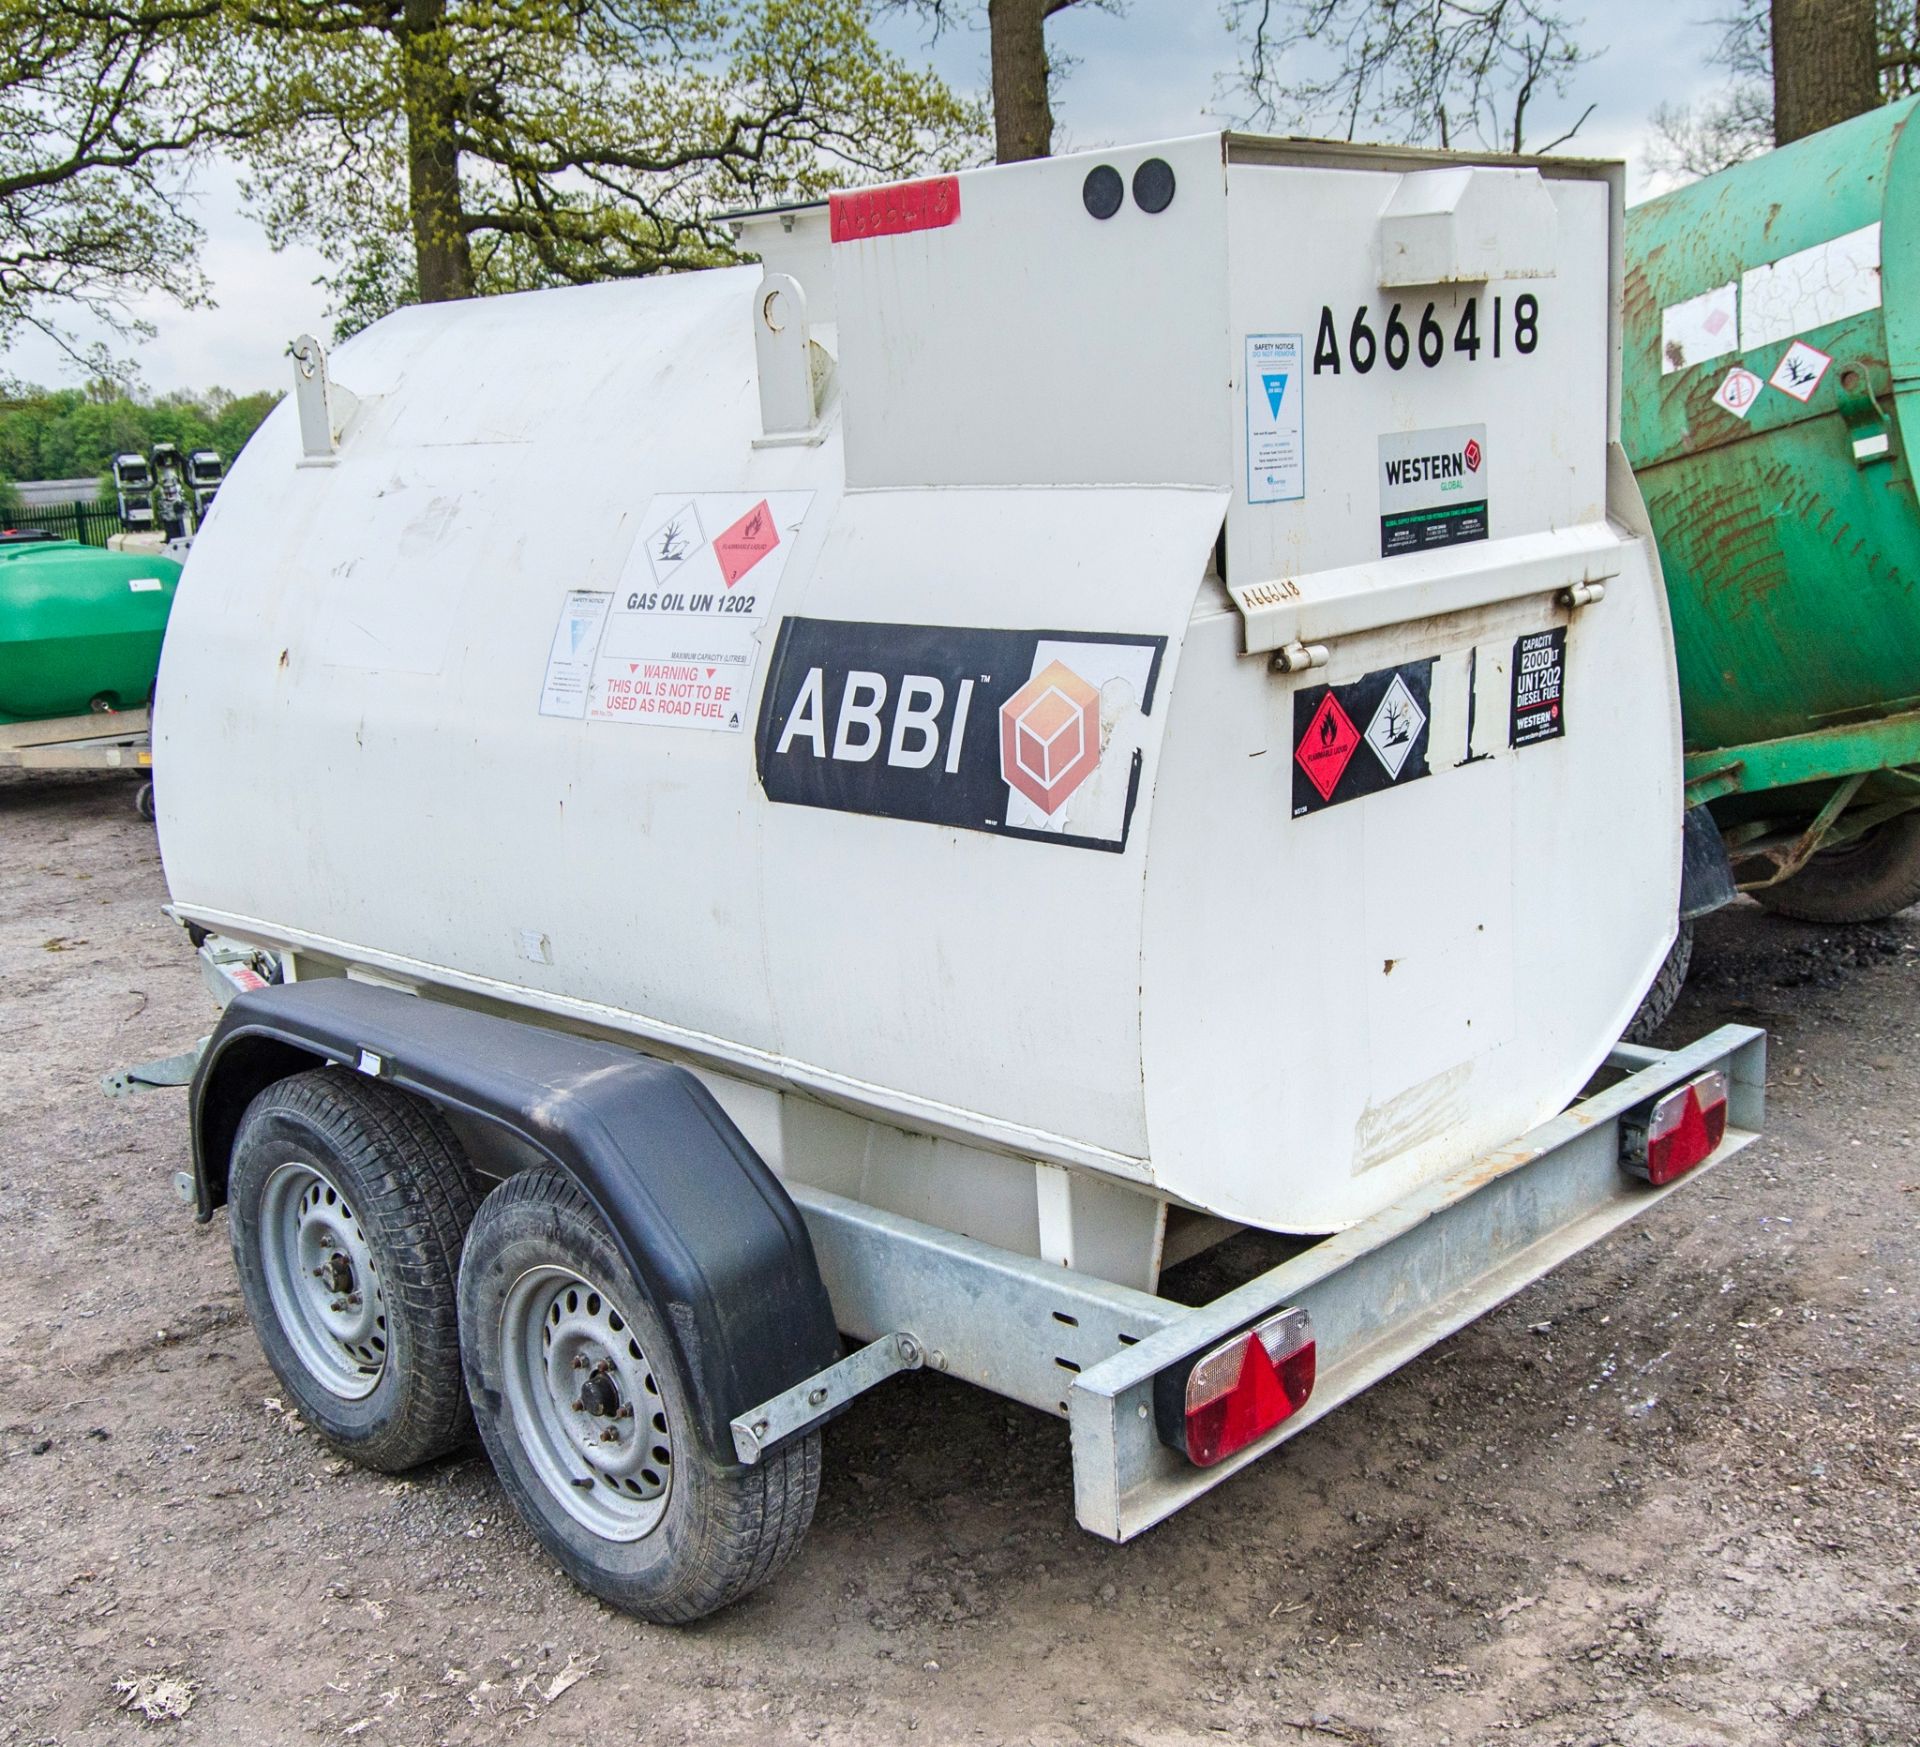 Western Abbi 200 litre tandem axle fast tow mobile bunded fuel bowser c/w manual pump, delivery hose - Image 4 of 7